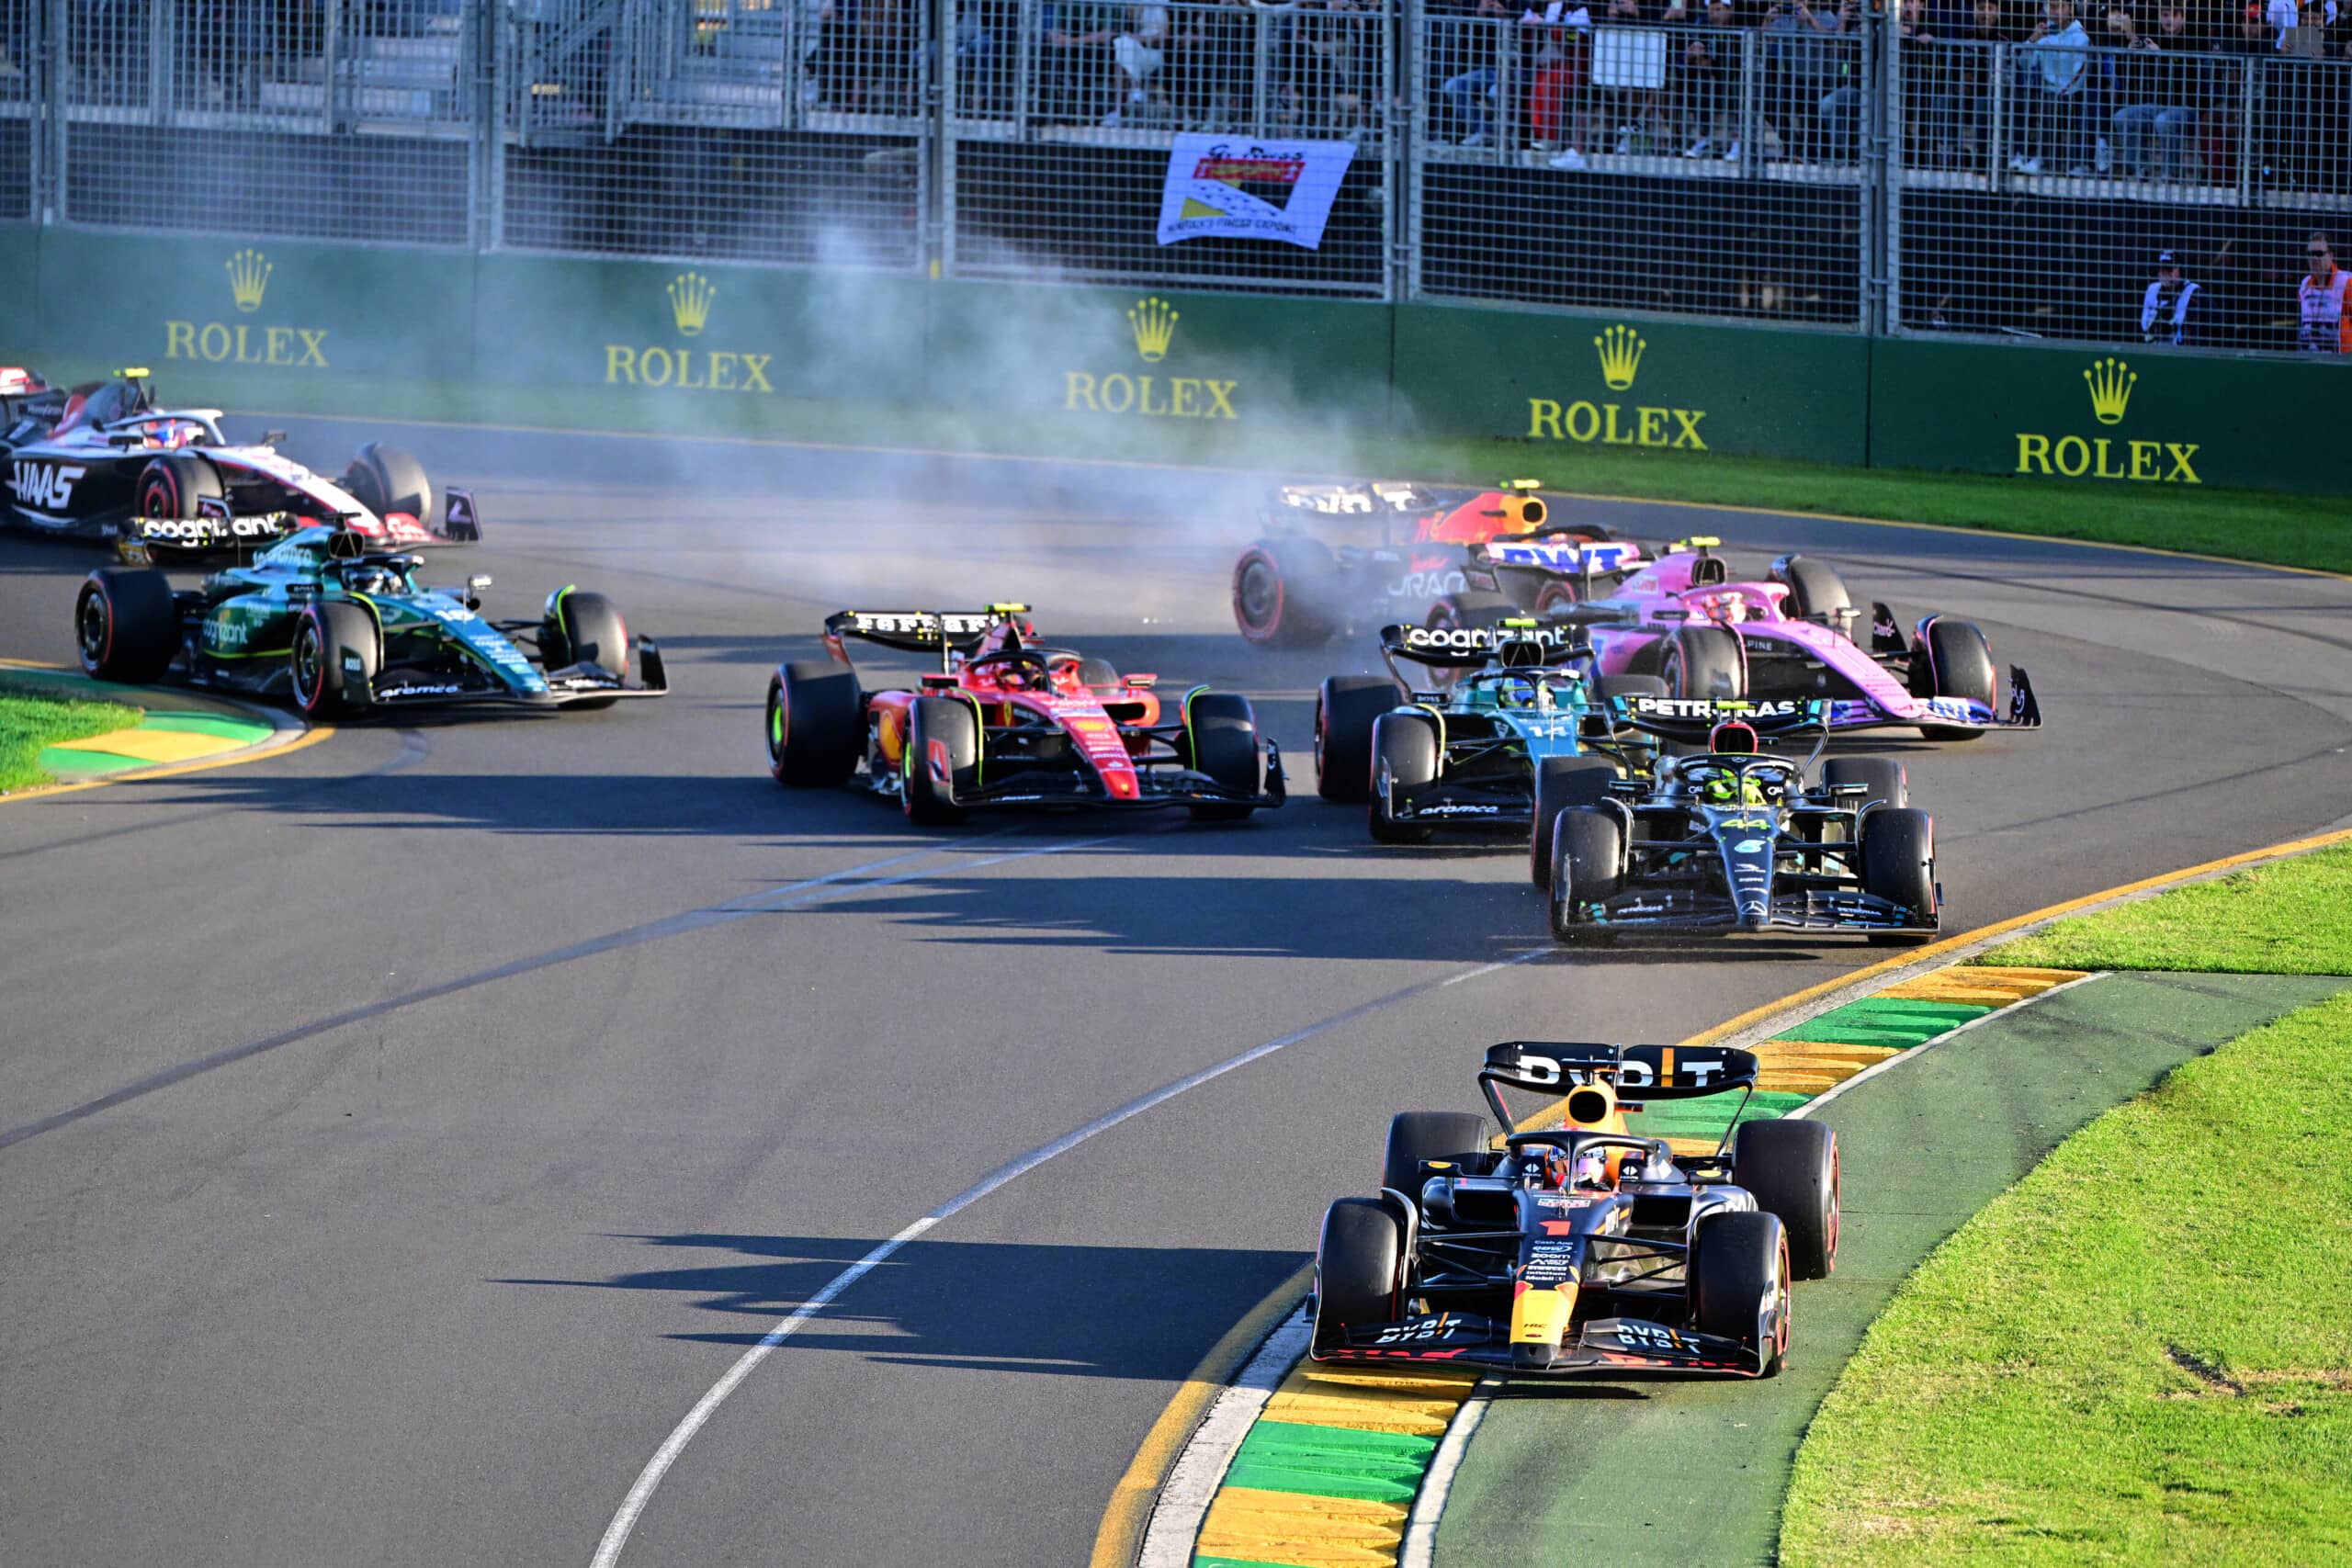 F1 Race Track Security And The Scrutiny On The Australian GP